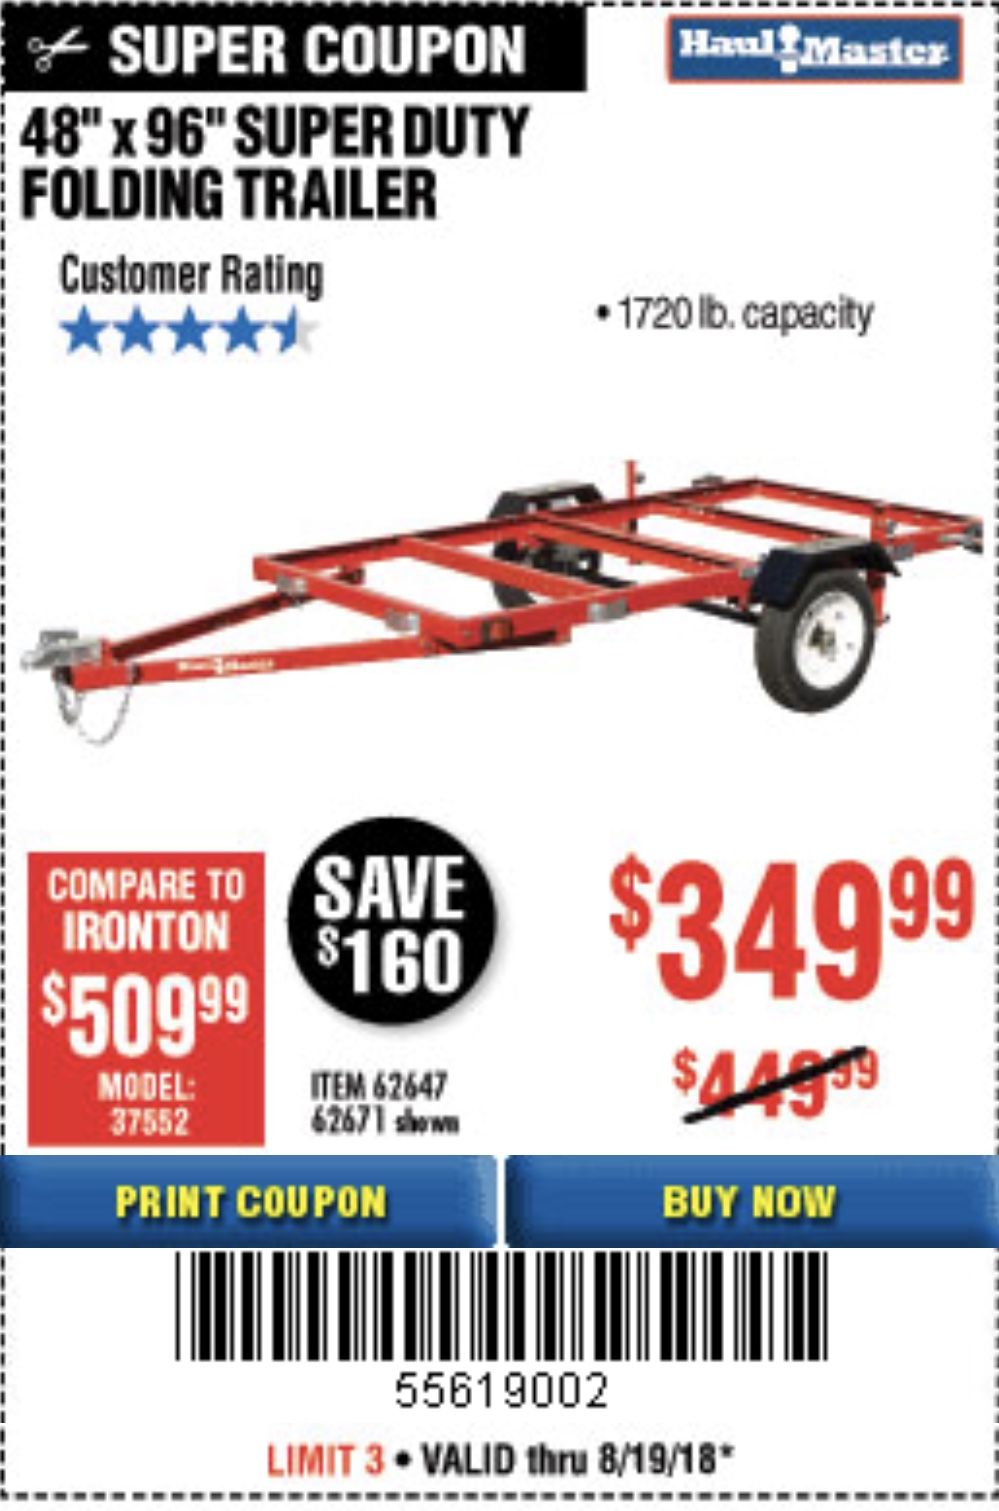 HAUL-MASTER 1720 Lb. Capacity 48 In. X 96 In. Super Duty Folding Trailer  for $339.99 – Harbor Freight Coupons